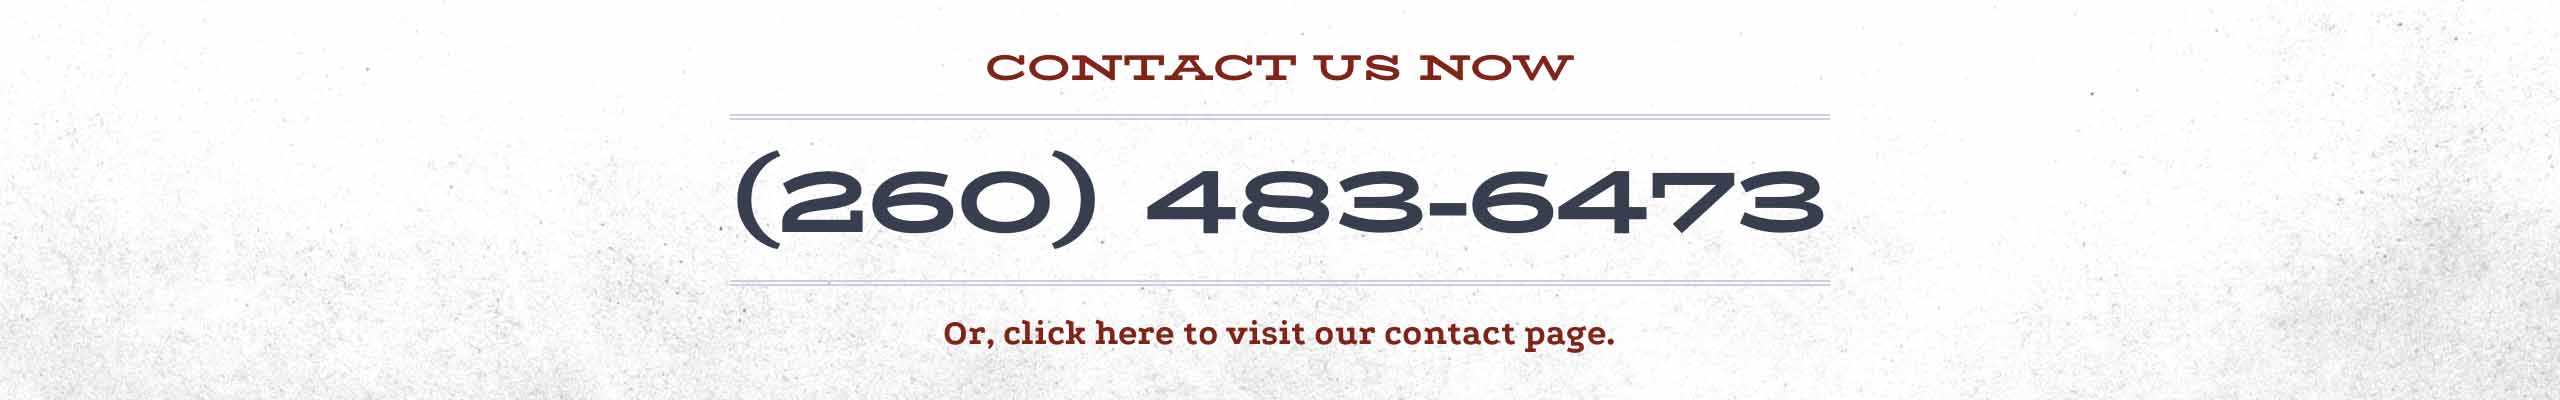 Contact us today at (260) 483-6473 or by clicking here to visit the contact page. 